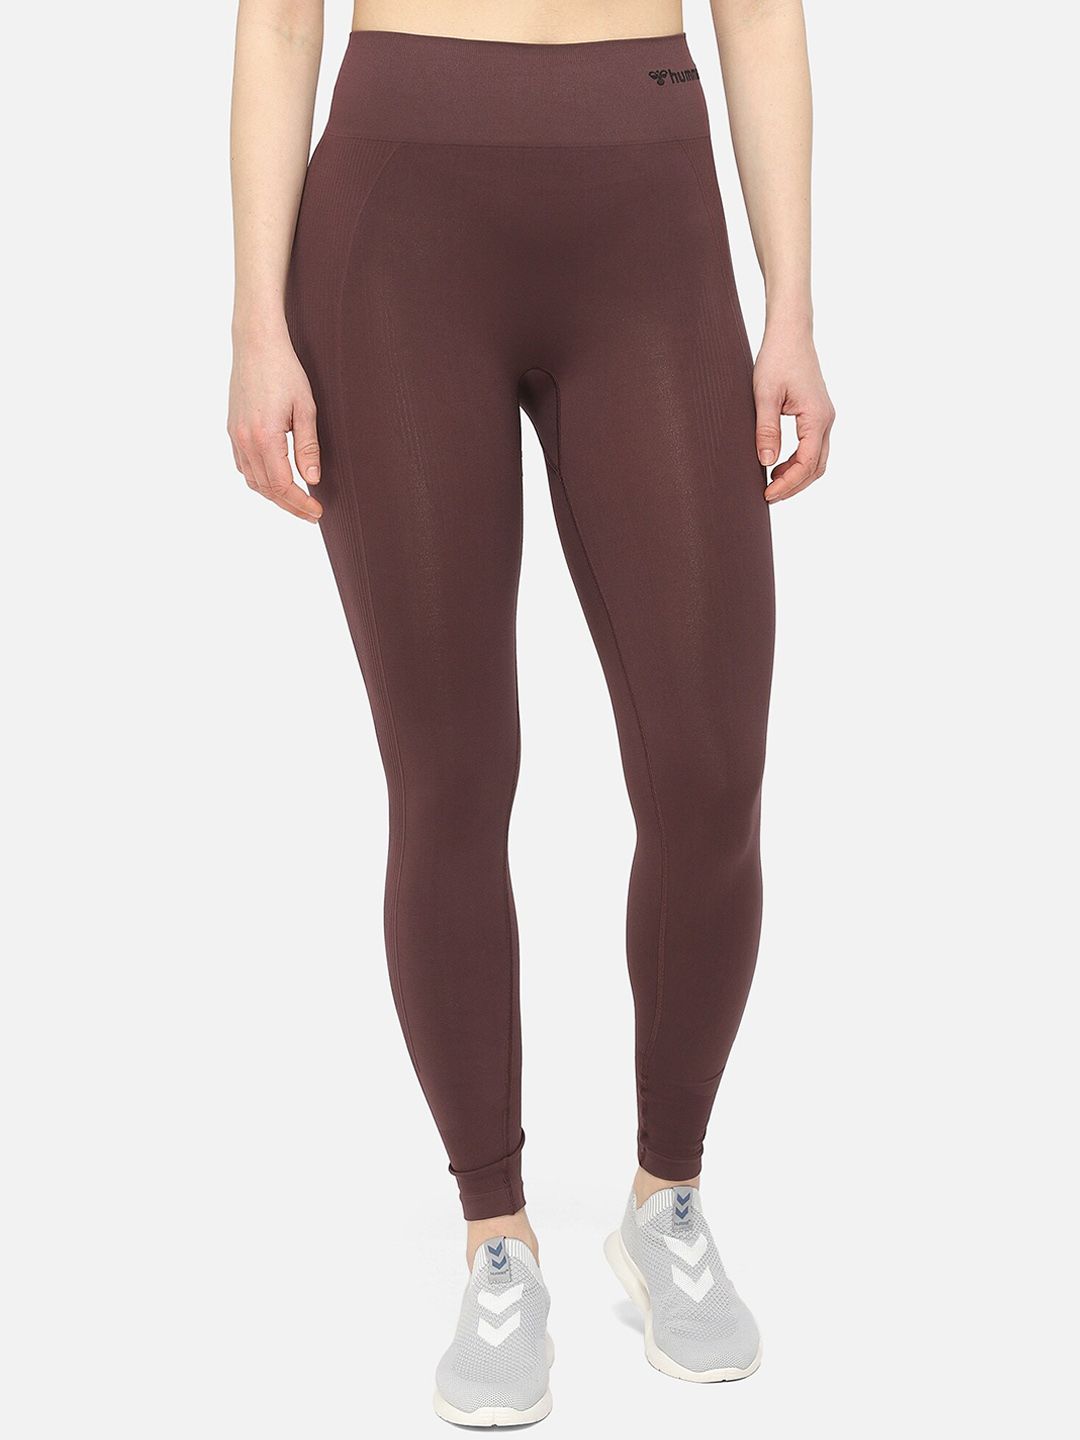 Hummel Women Brown Solid High Rise Casual Tights Price in India